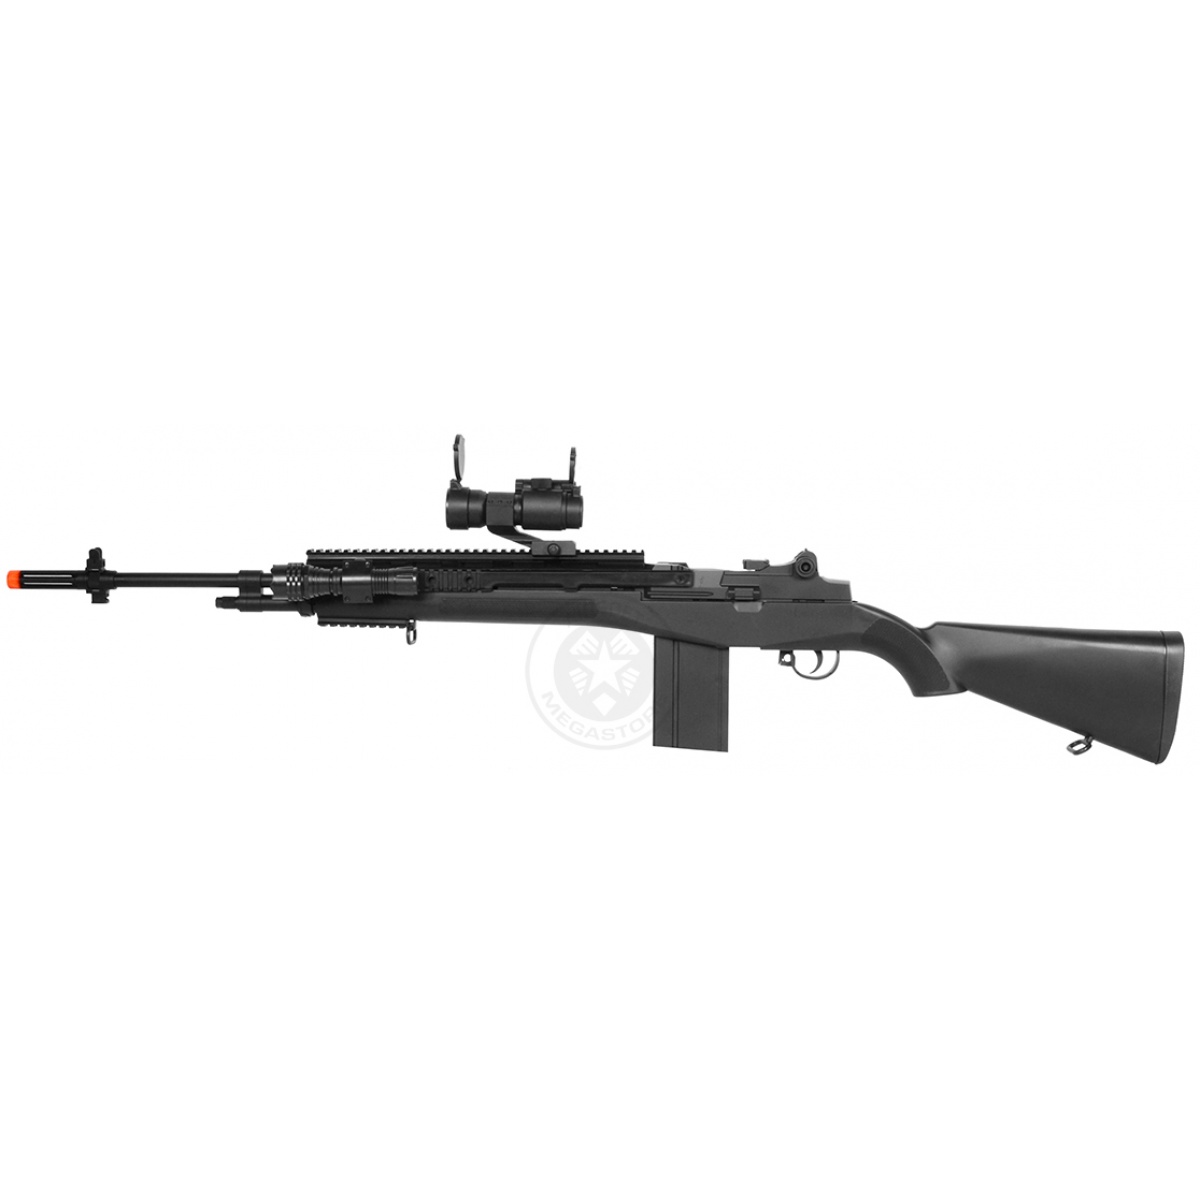 400 FPS AGM Airsoft M14 RIS Spring Sniper Rifle w/ Red Dot | Airsoft ...